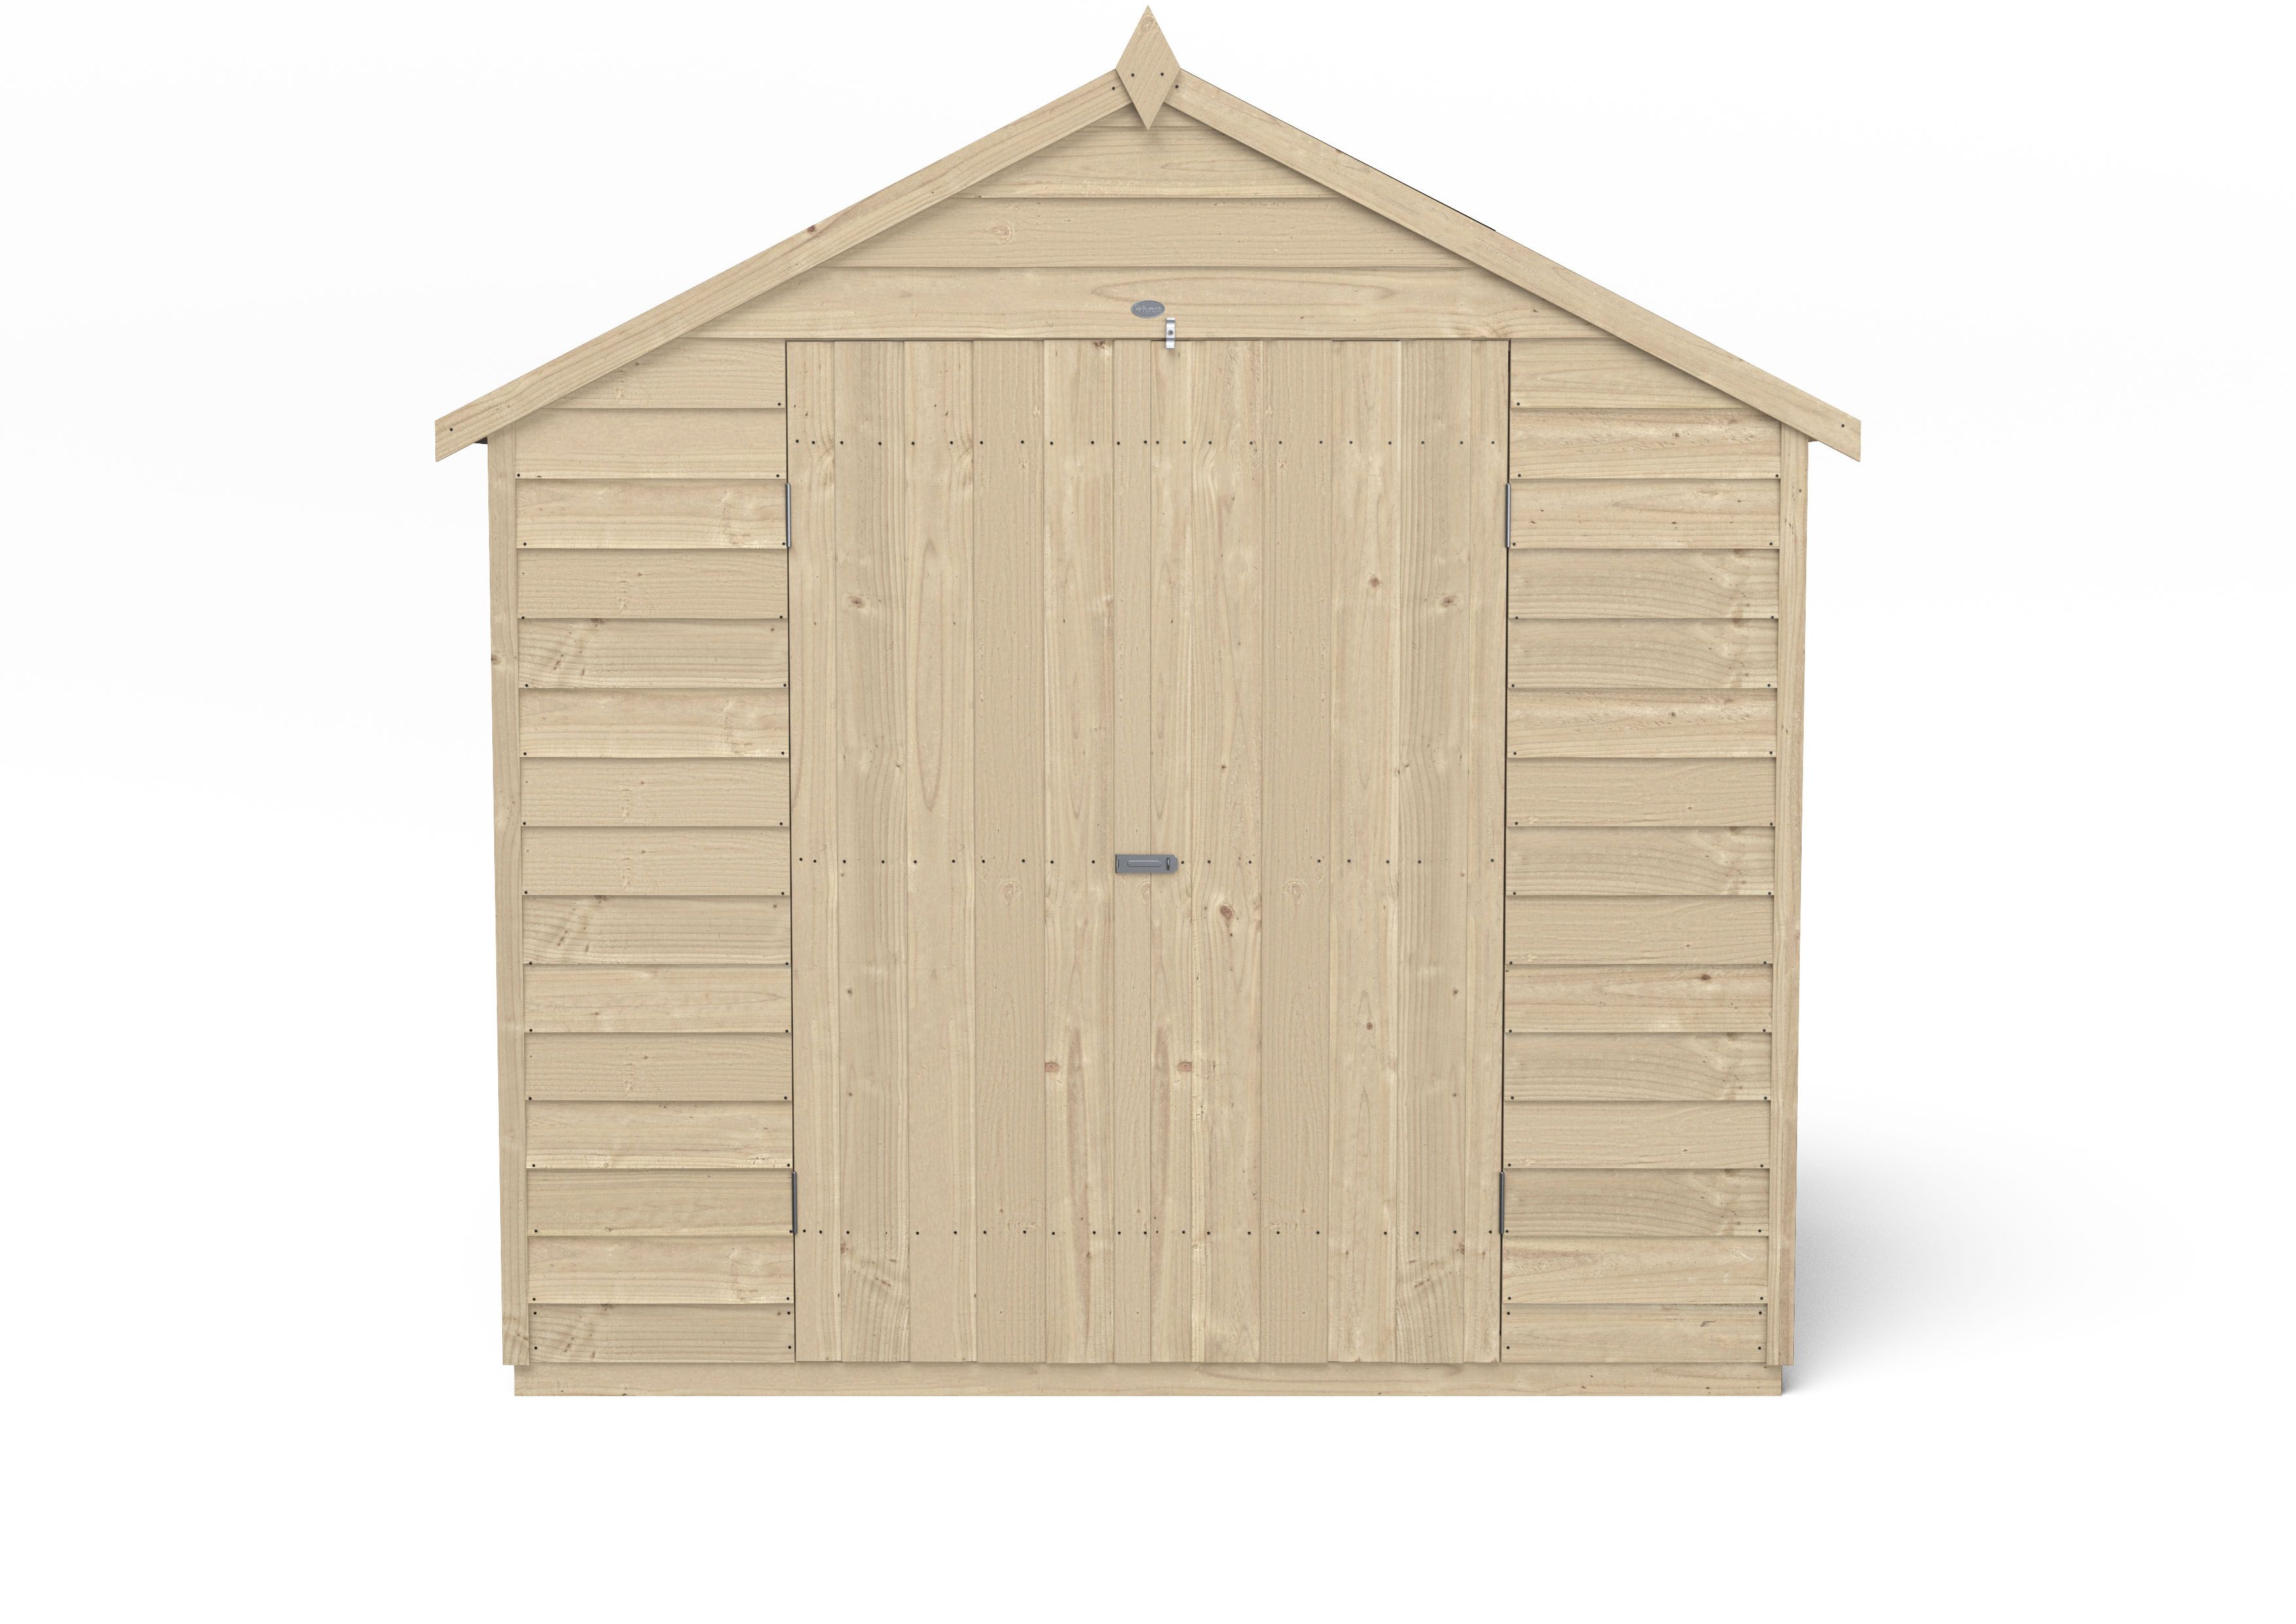 Forest Garden Overlap 7x5 ft Apex Wooden Pressure treated 2 door Shed with floor & 1 window - Assembly service included